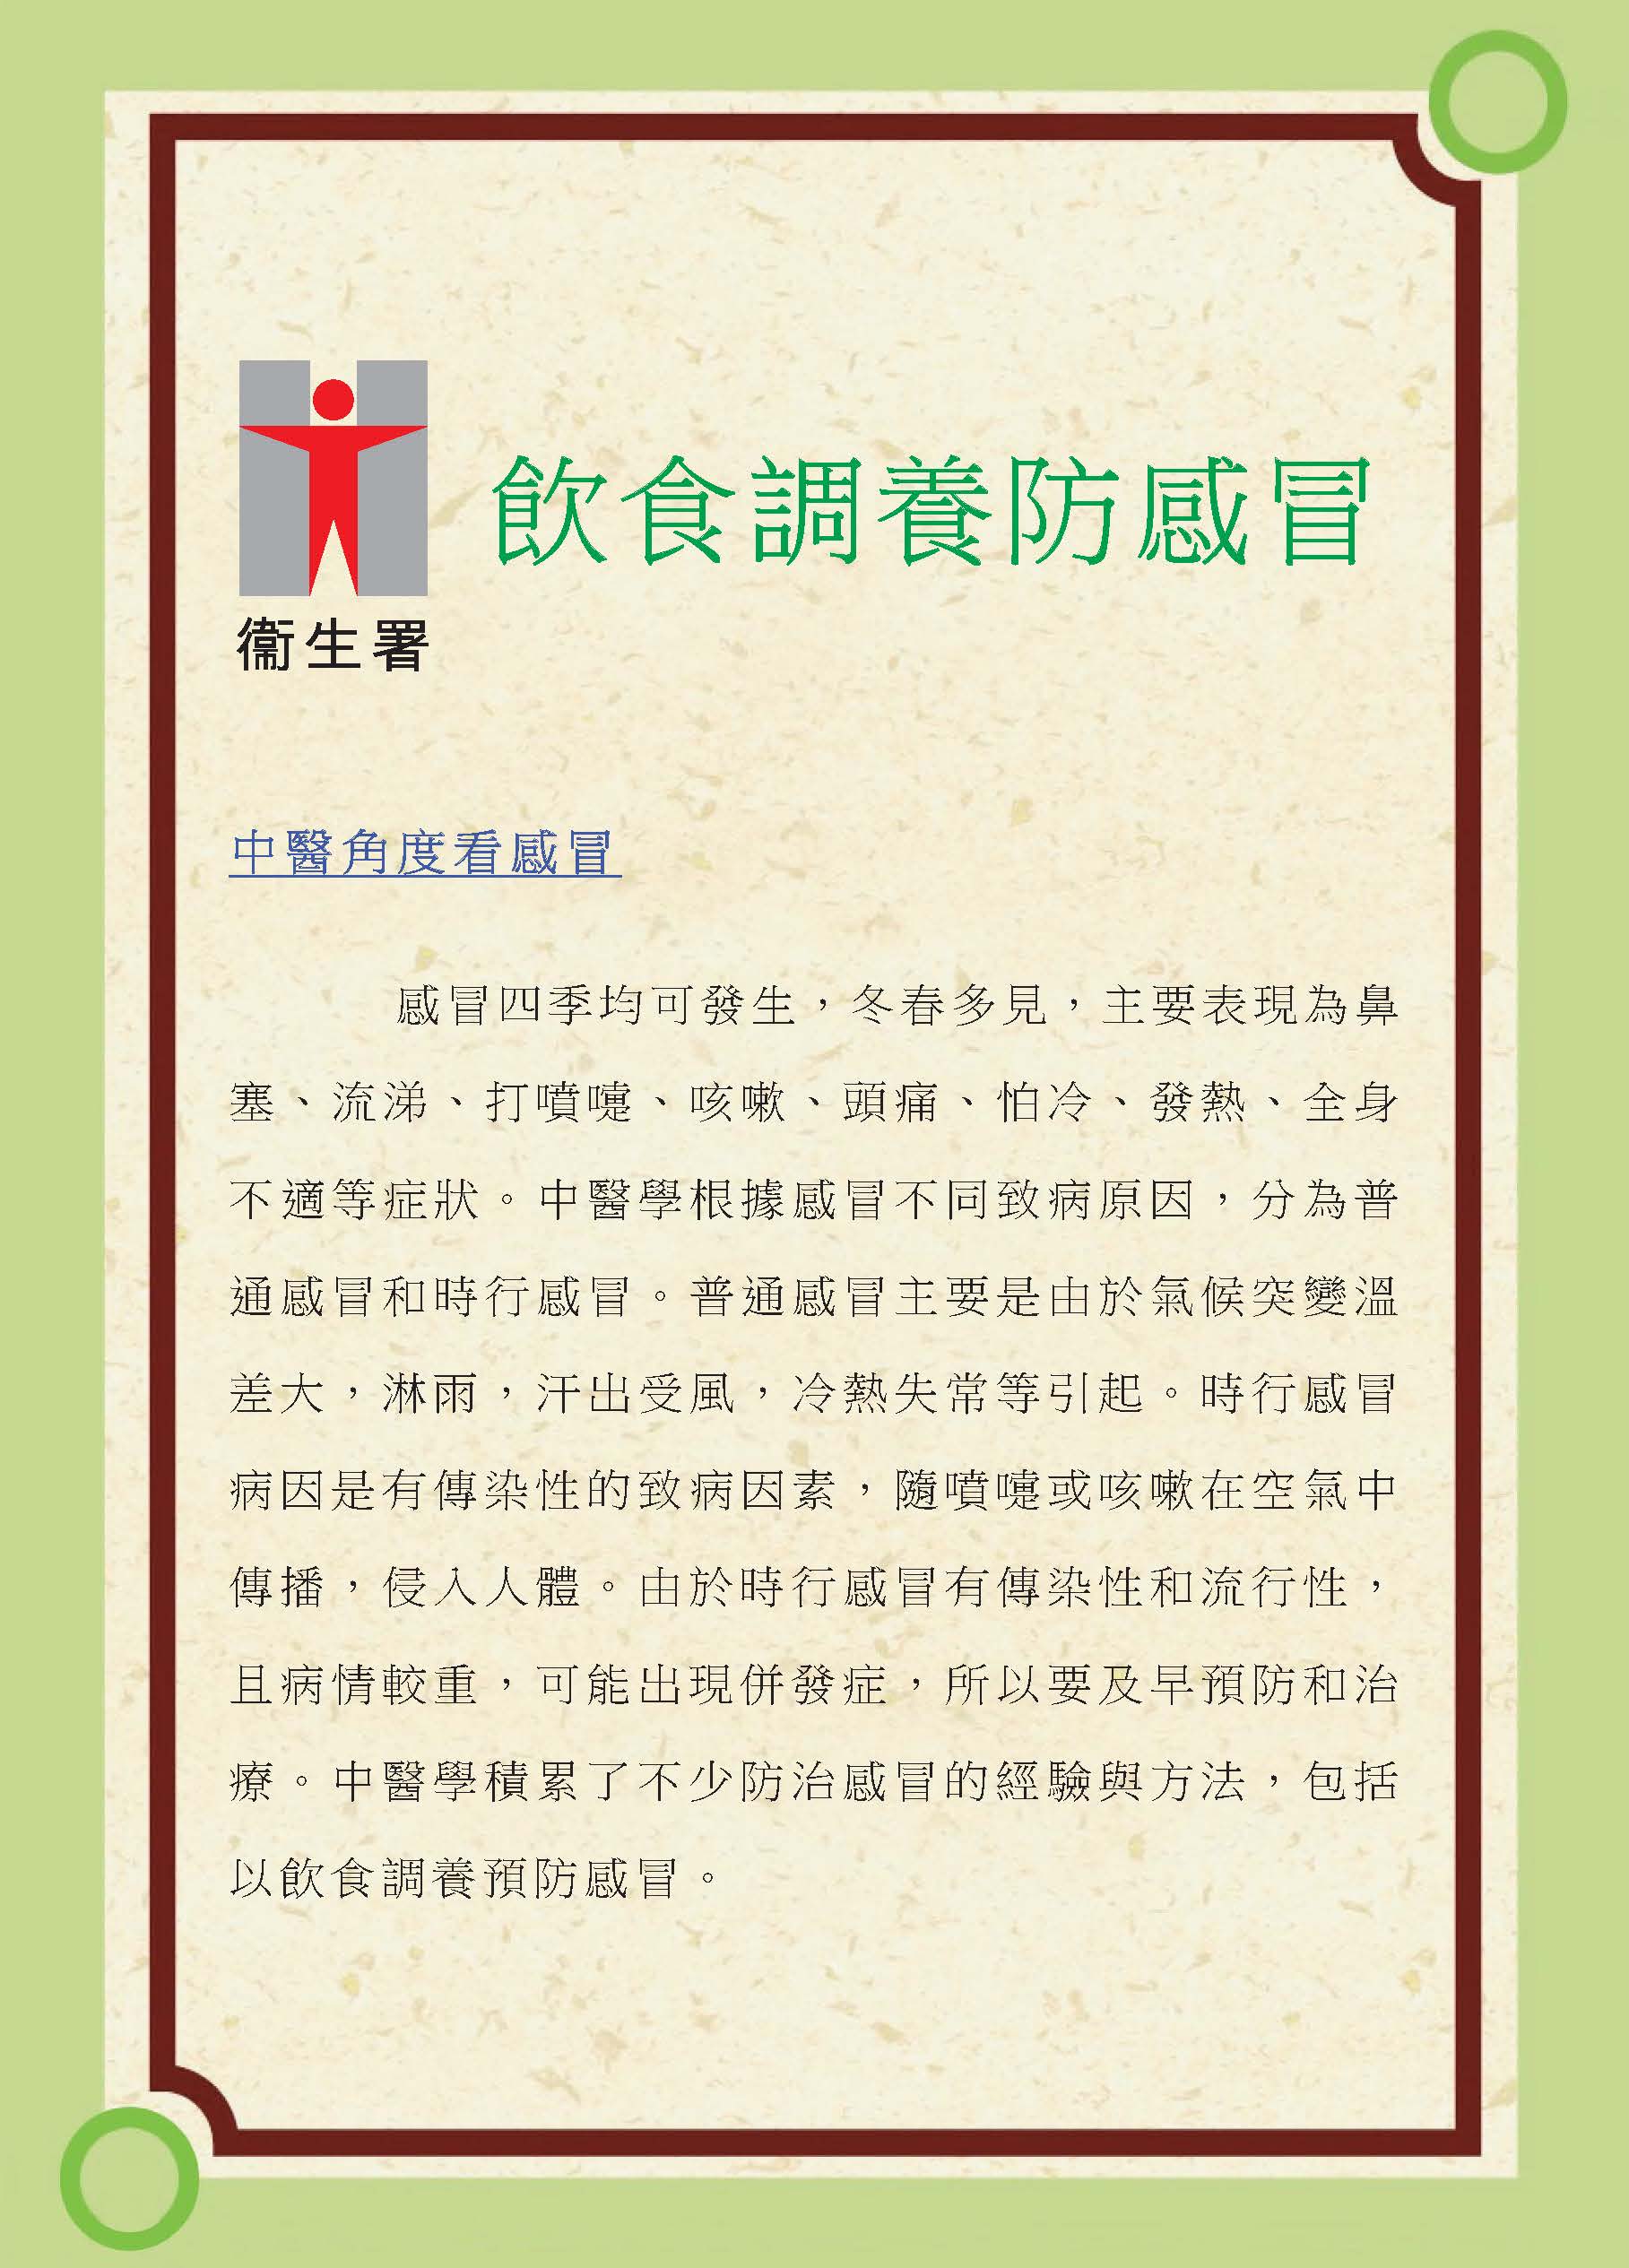 Prevention of Colds by Food (Publication)(Chinese)